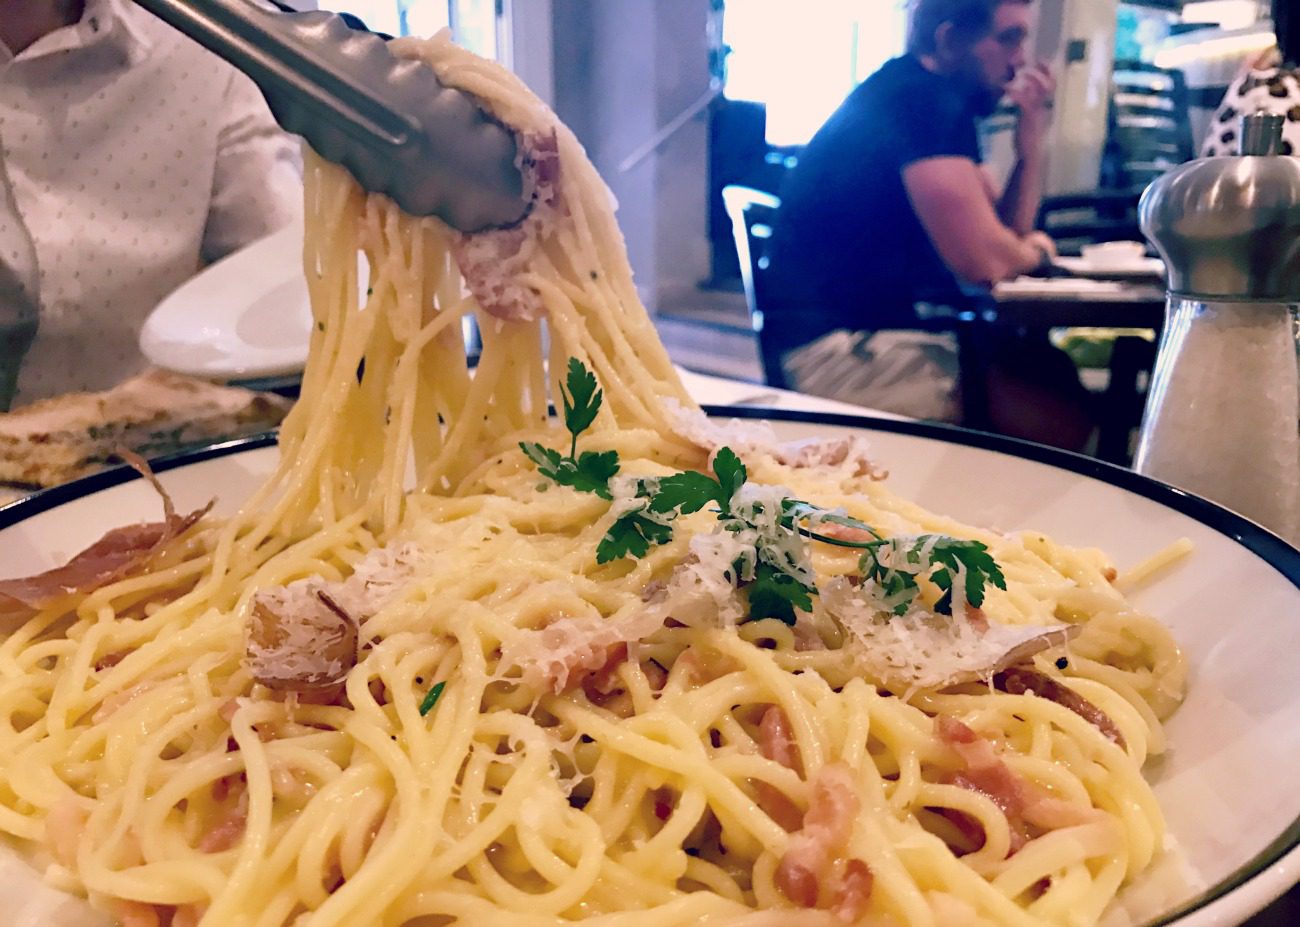 We went to check out the Prezzo La Famiglia sharing bowls that are new at Prezzo to bring the family together over a lovely meal. Find out what we thought.